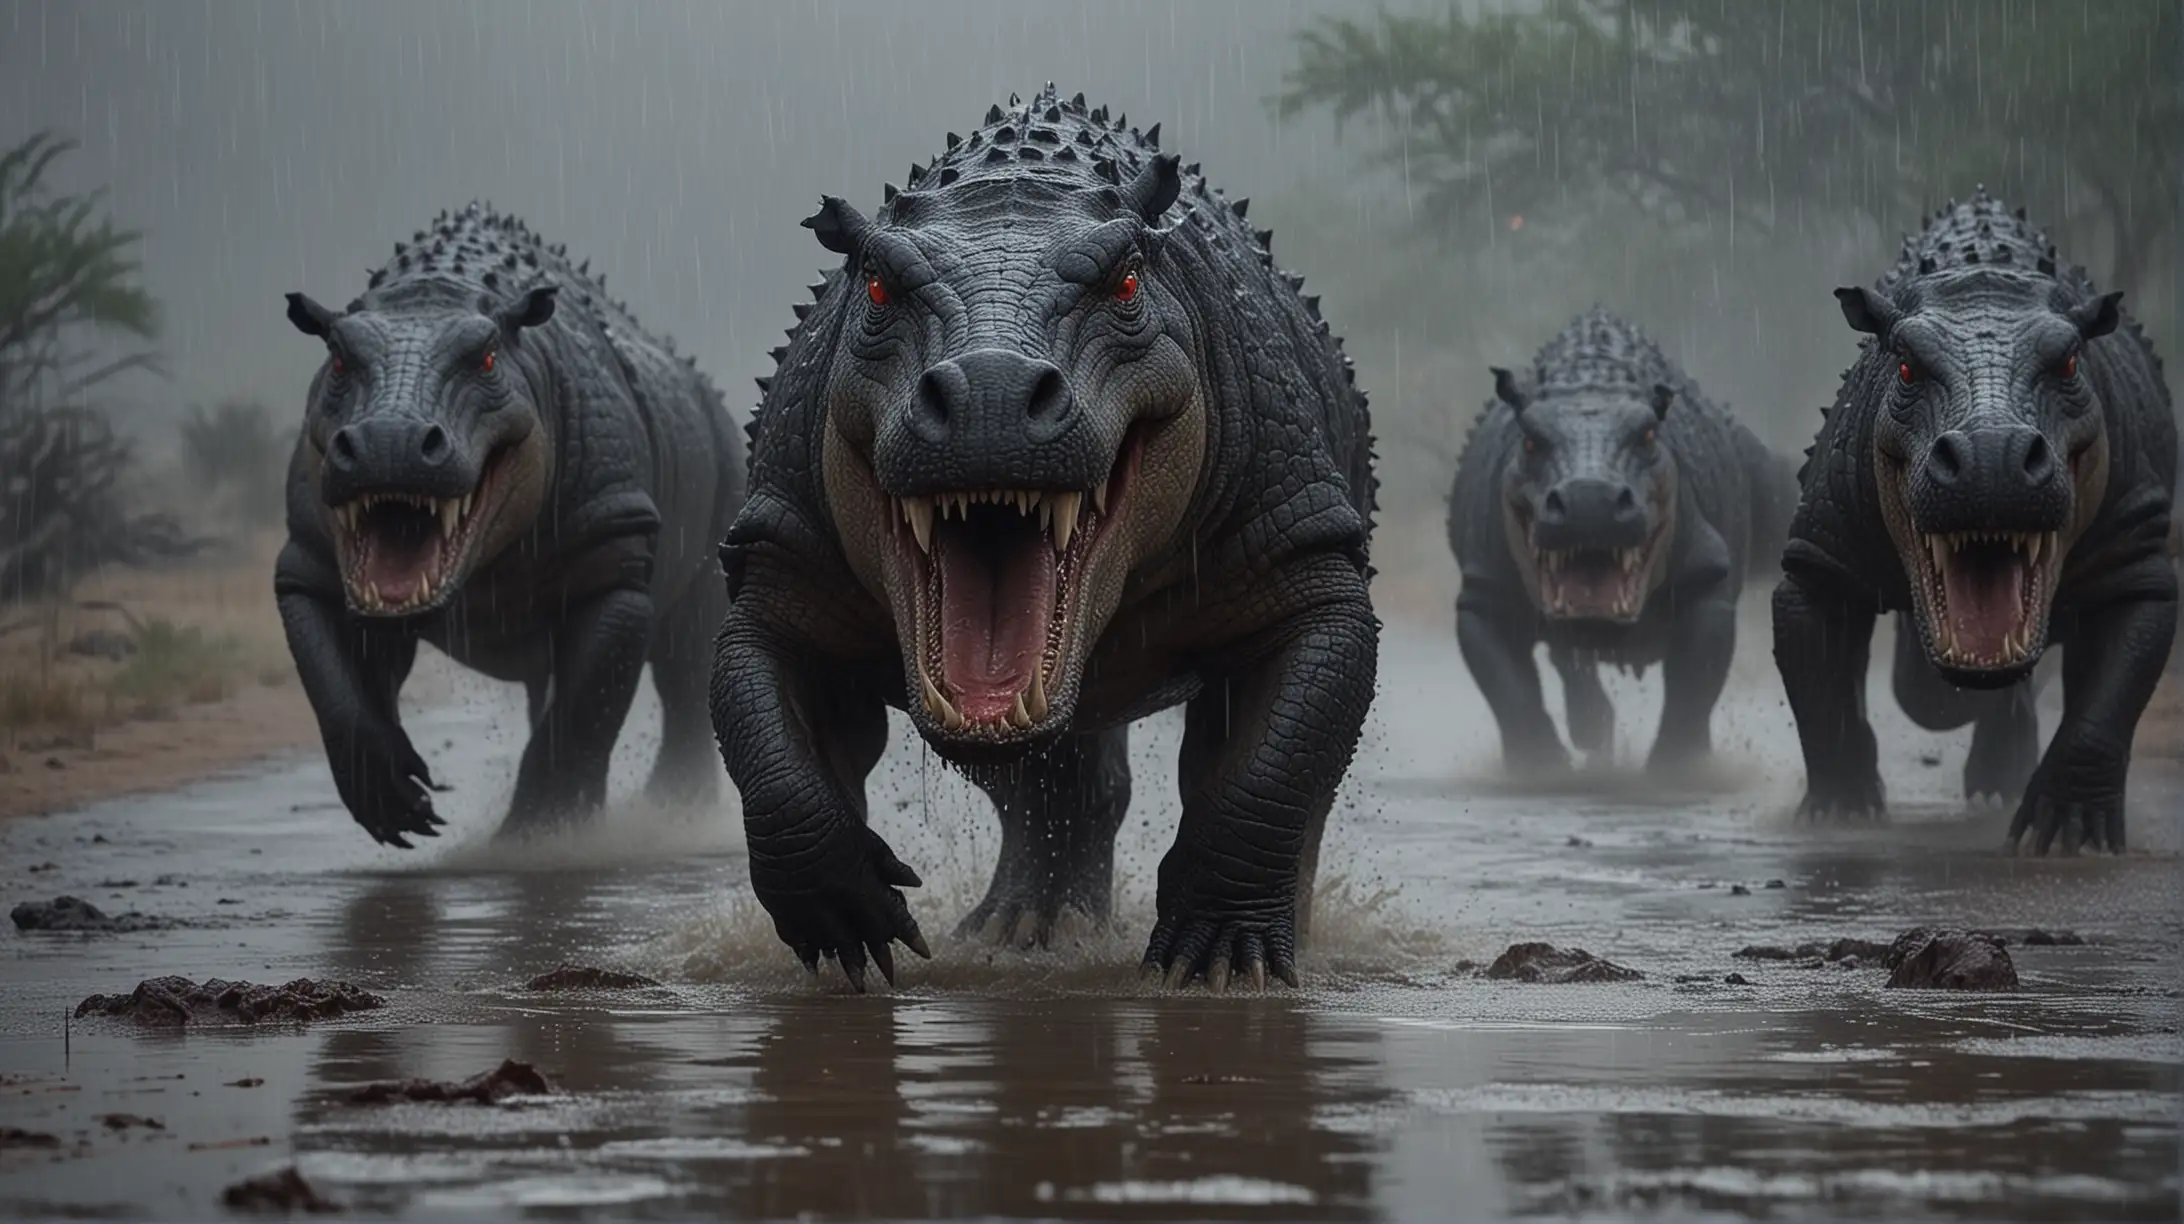 Cinematic. Desert, Rain, Night, Monster creatures running through puddles in torrential rainstorm, with horns on their head, spiked tails, claws on feet, crocodile snoot, mouths open showing crocodile teeth, red eyes, hippo-style body, light gray and dark gray mottled spots. .